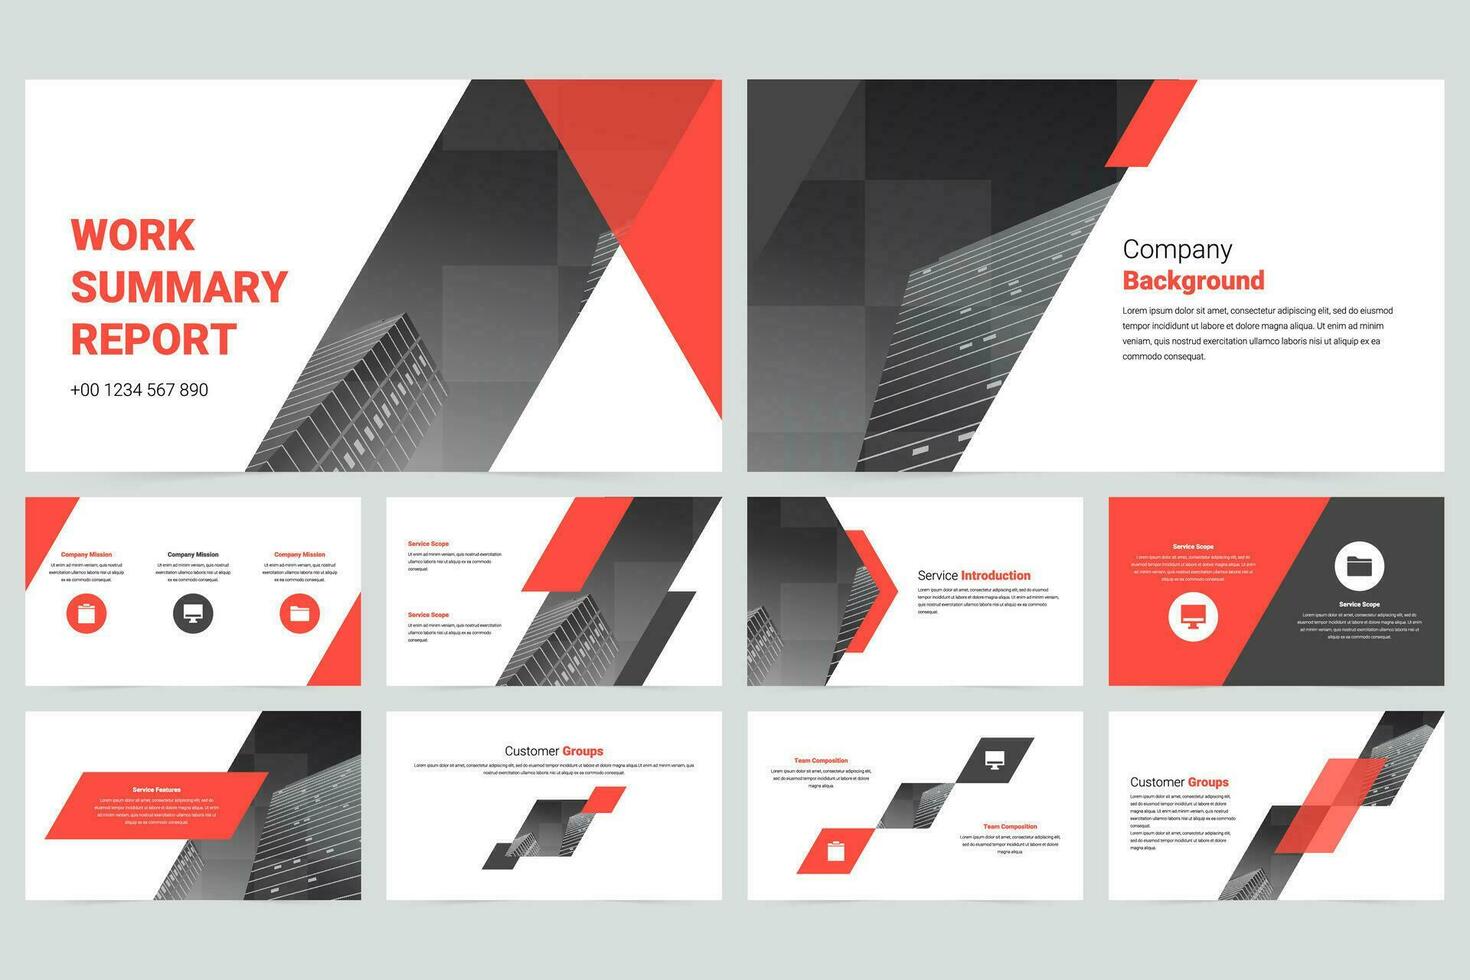 Red and black modern business marketing company slide presentation template vector